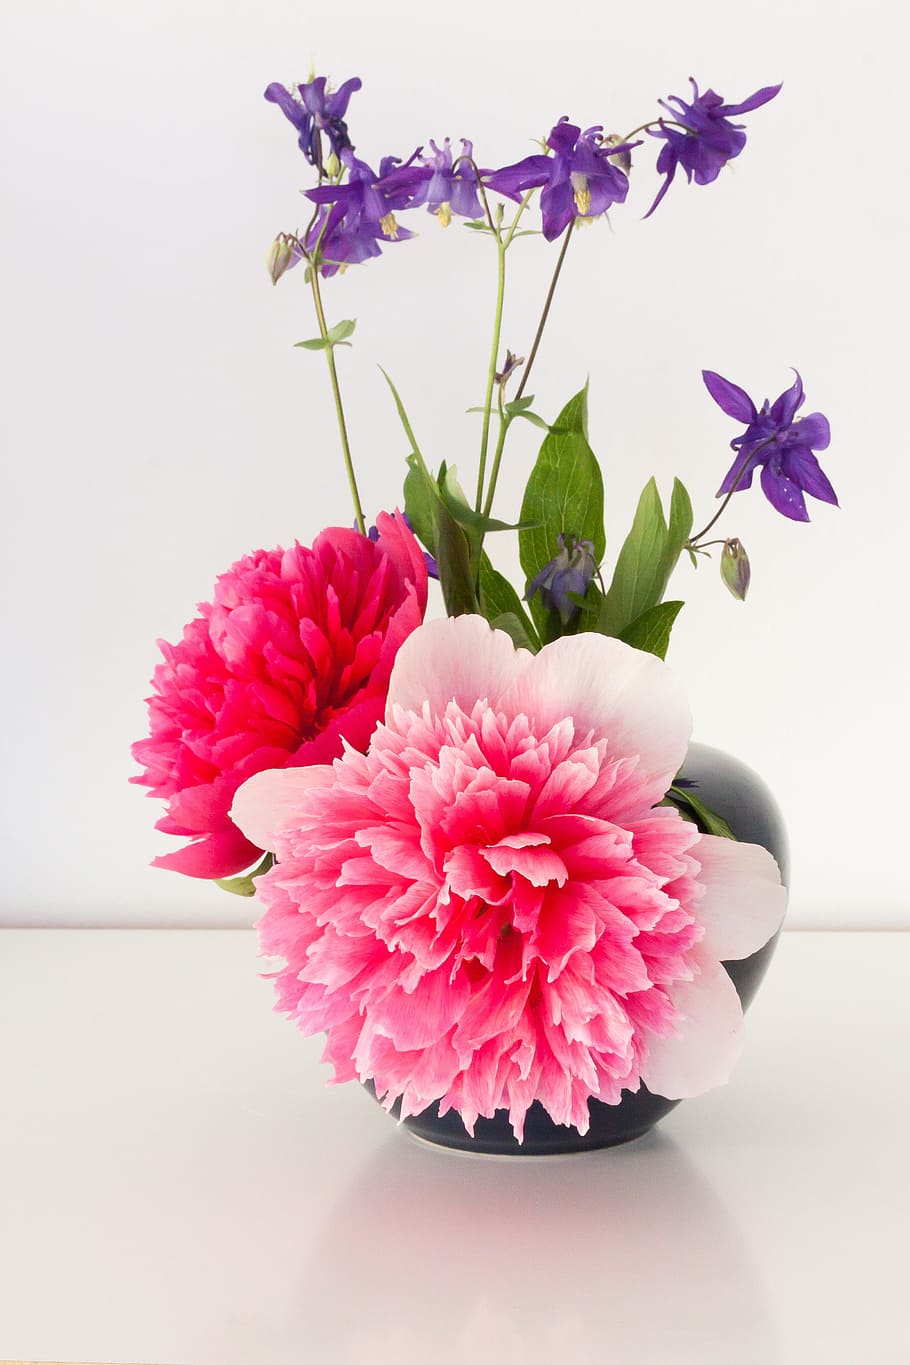 photography, bouquet, pink, carnation flowers, purple, flowers, peony, pentecost, nature, spring